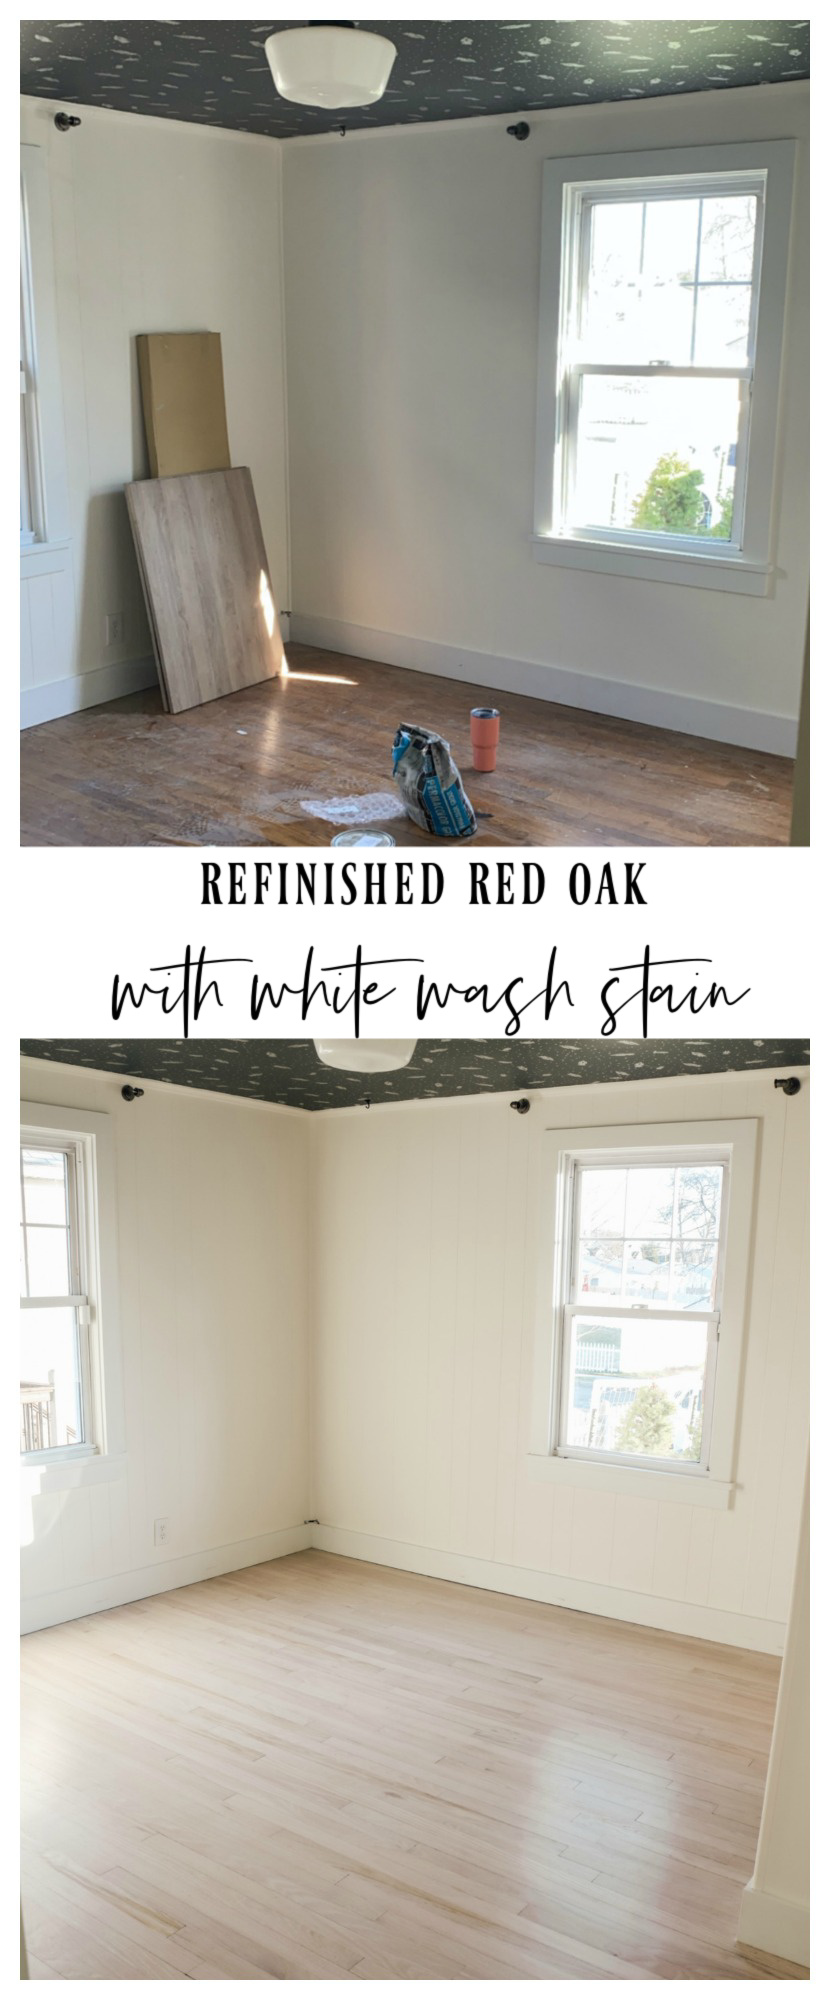 How we refinished our red oak floors to white wash